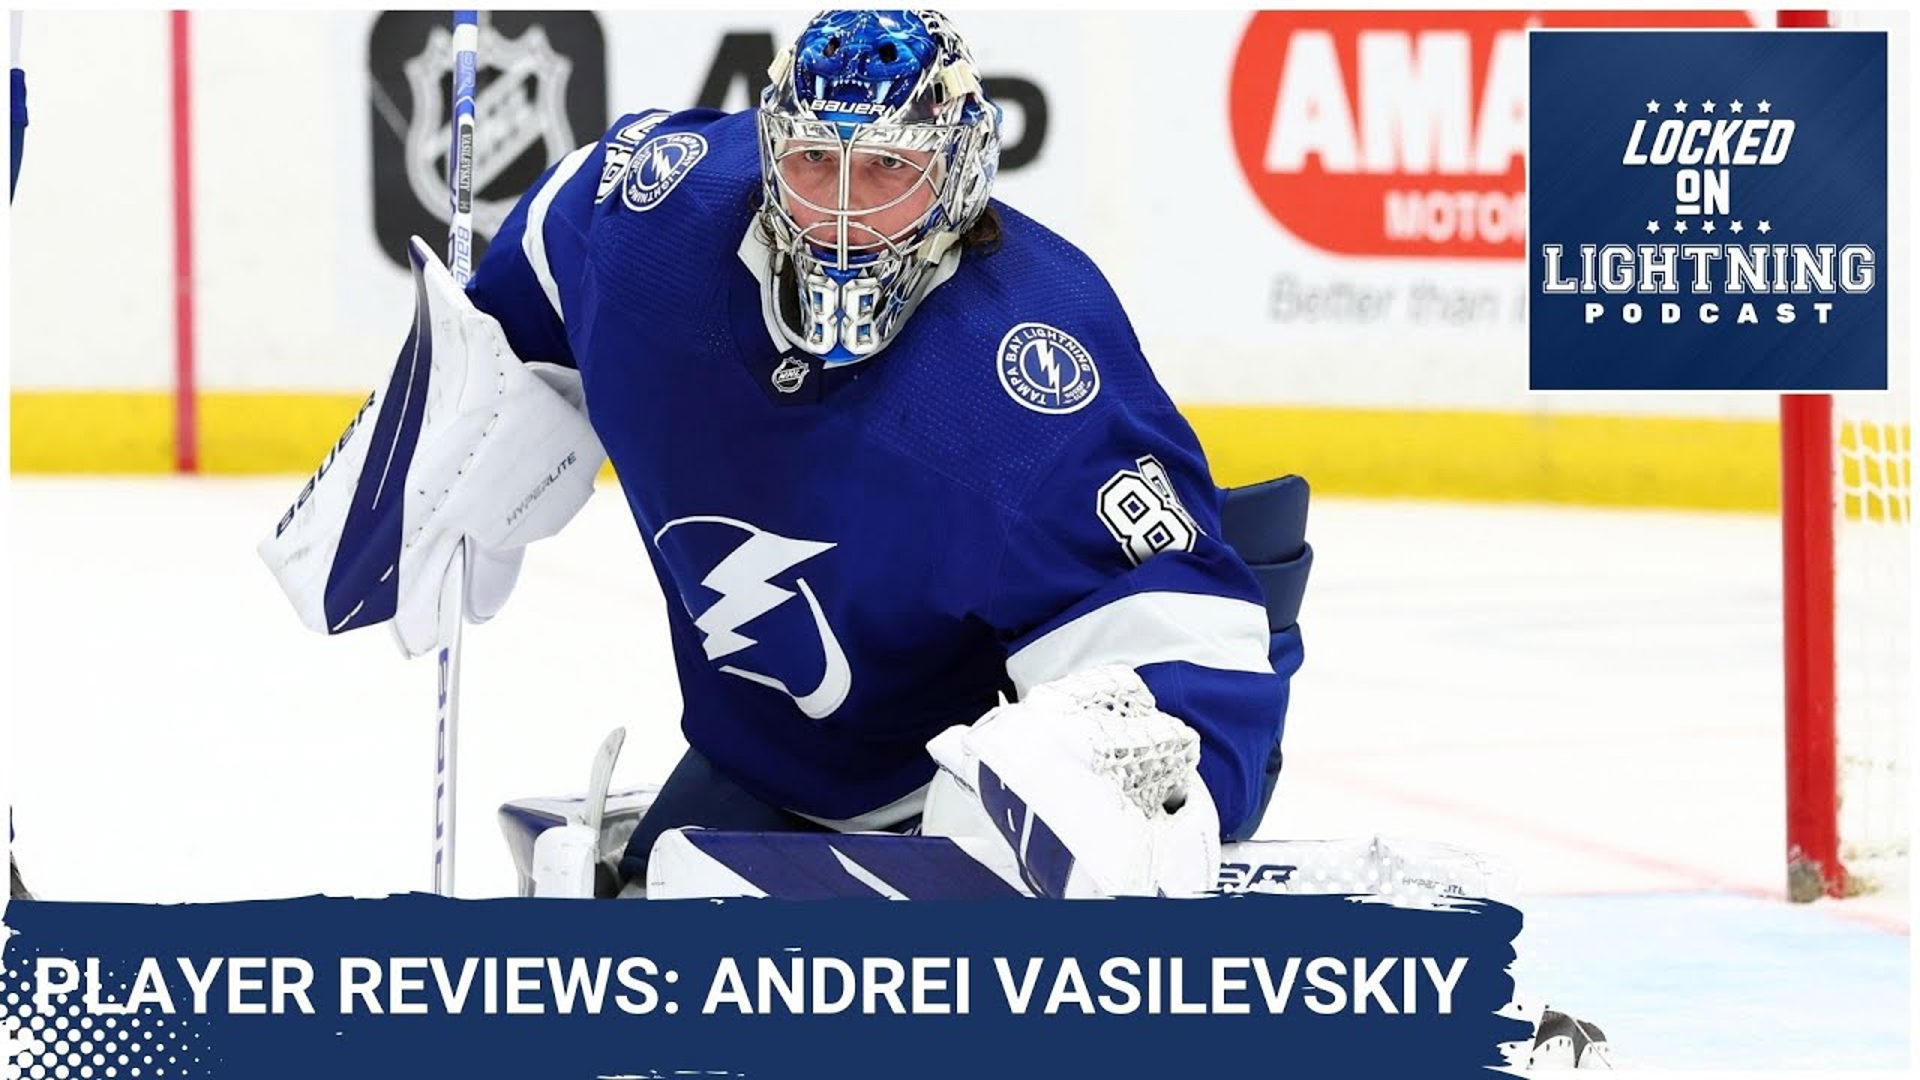 Andrei Vasilevskiy spent the first two months of the season as he was recovering from offseason back surgery.